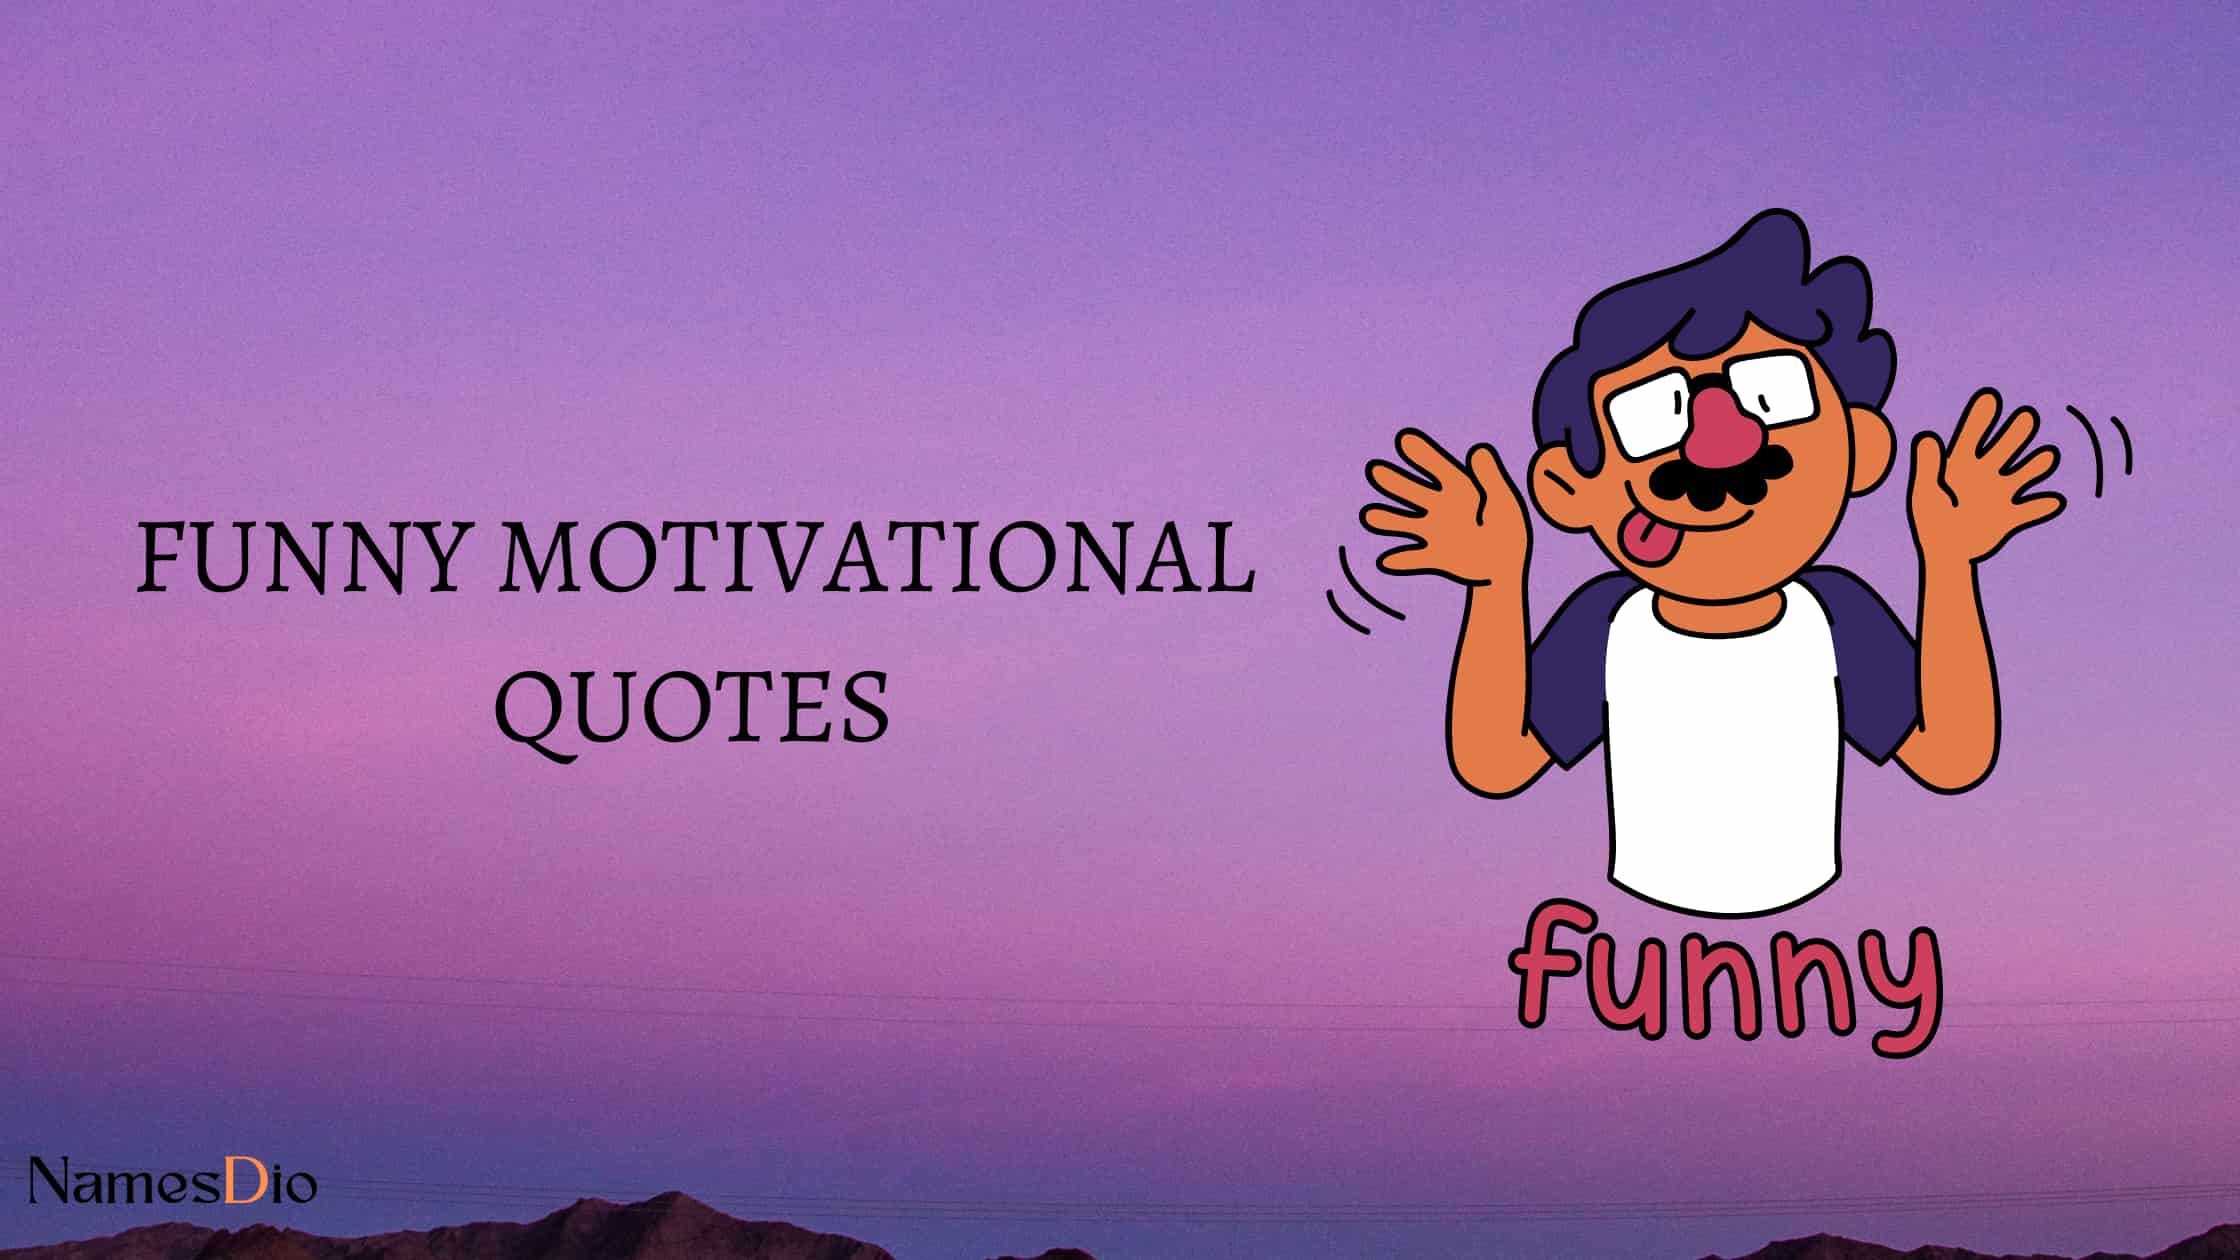 Funny-Motivational-Quotes